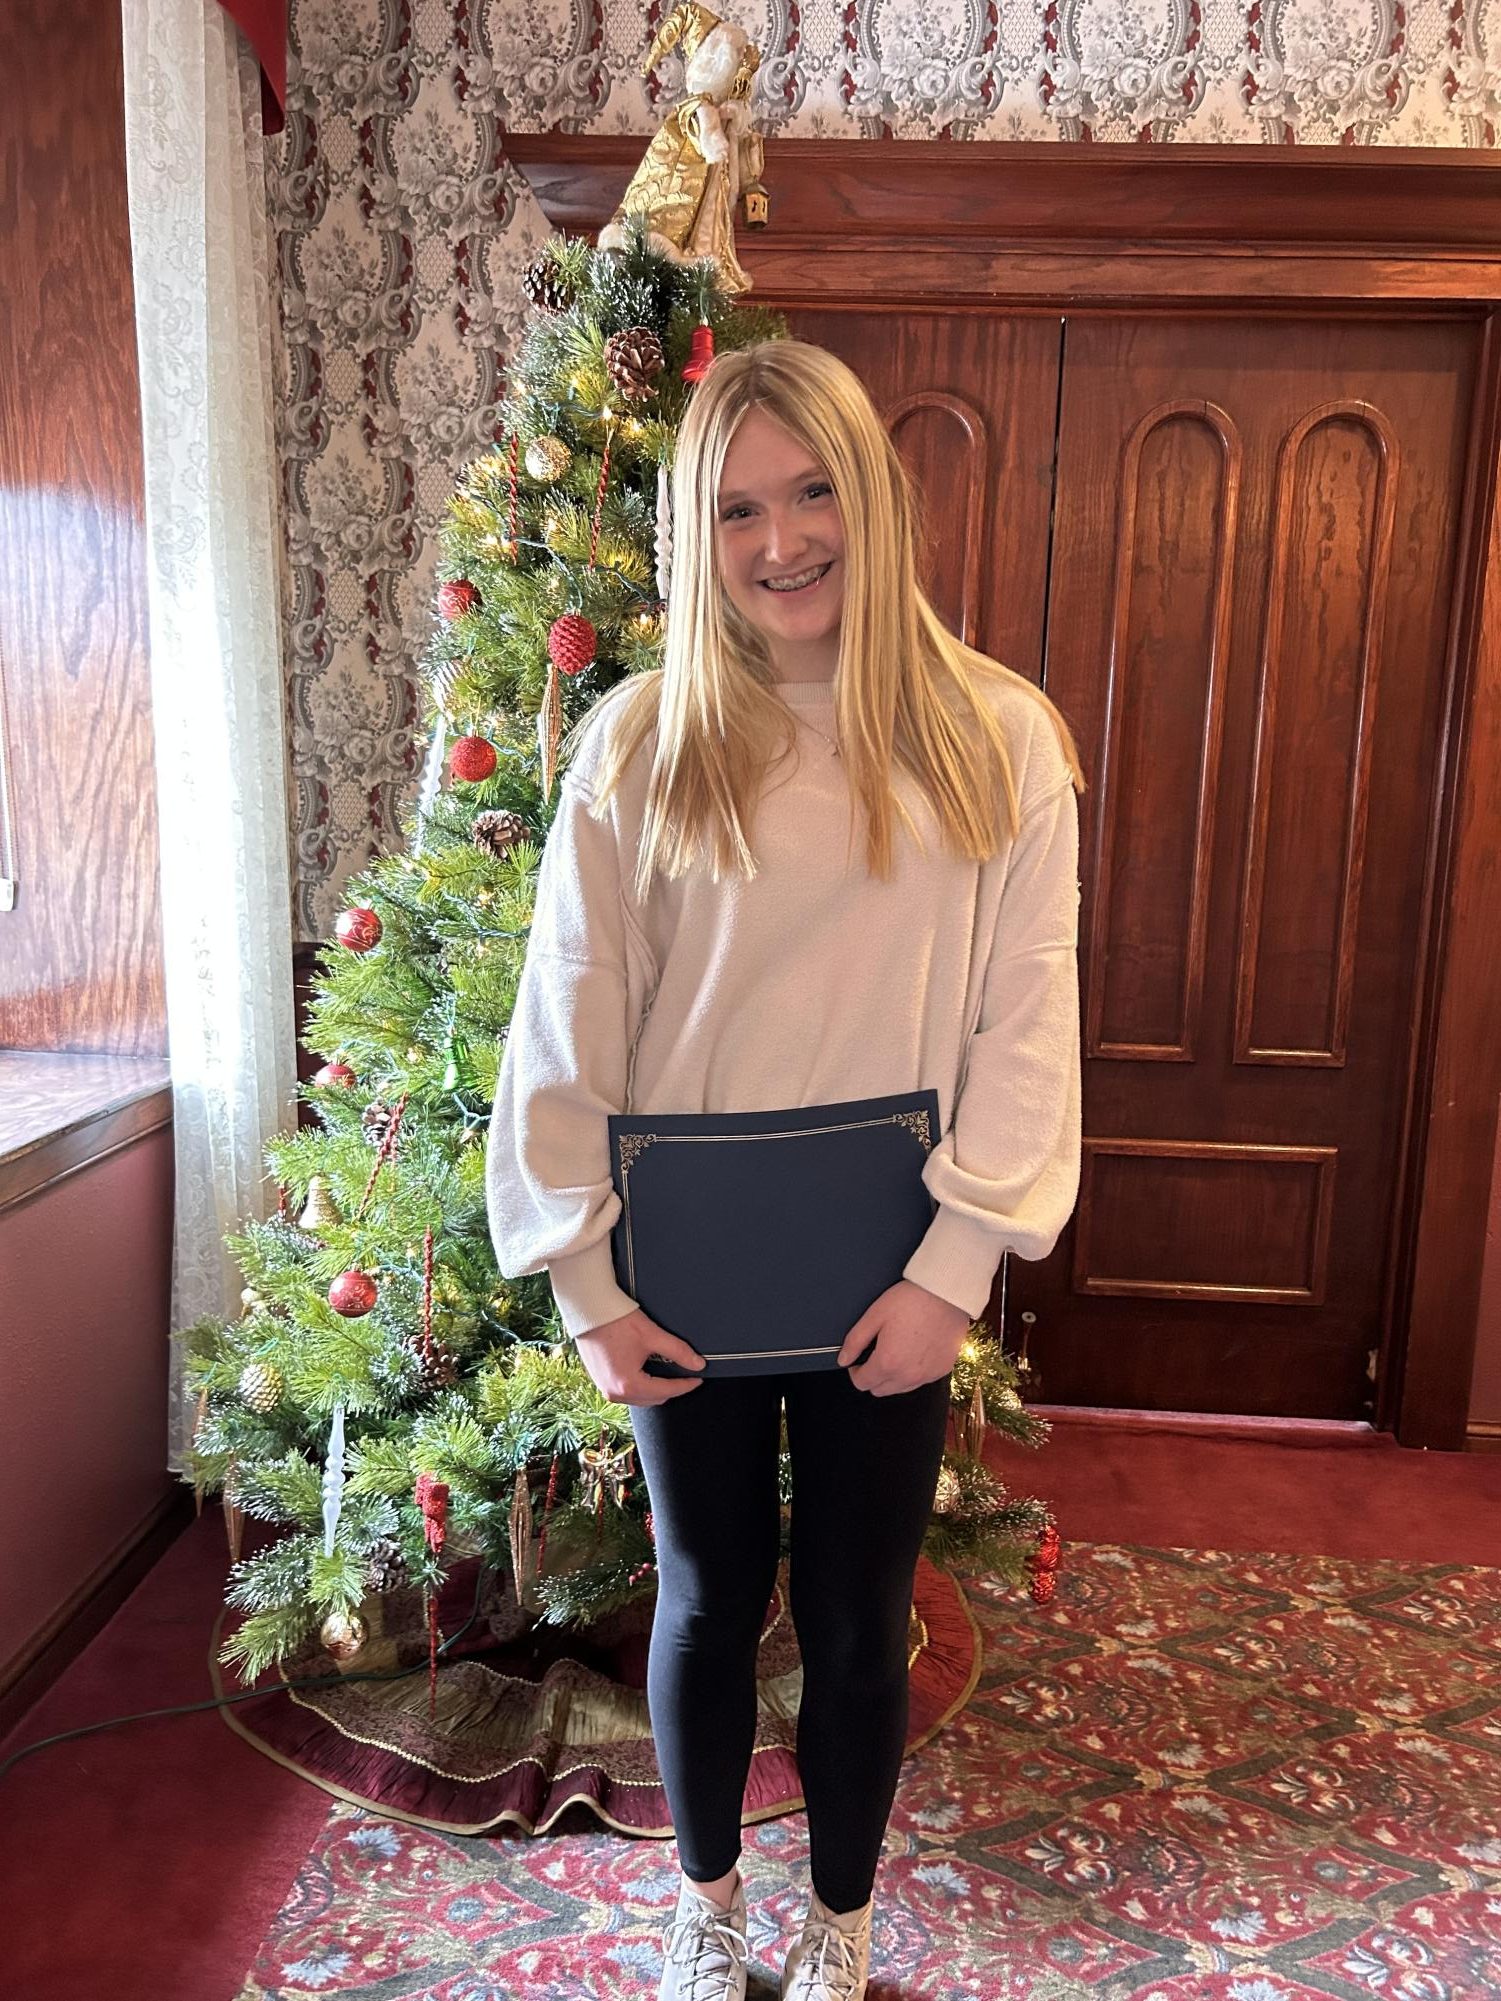 Galena Rotary Recognizes Student of the Quarter